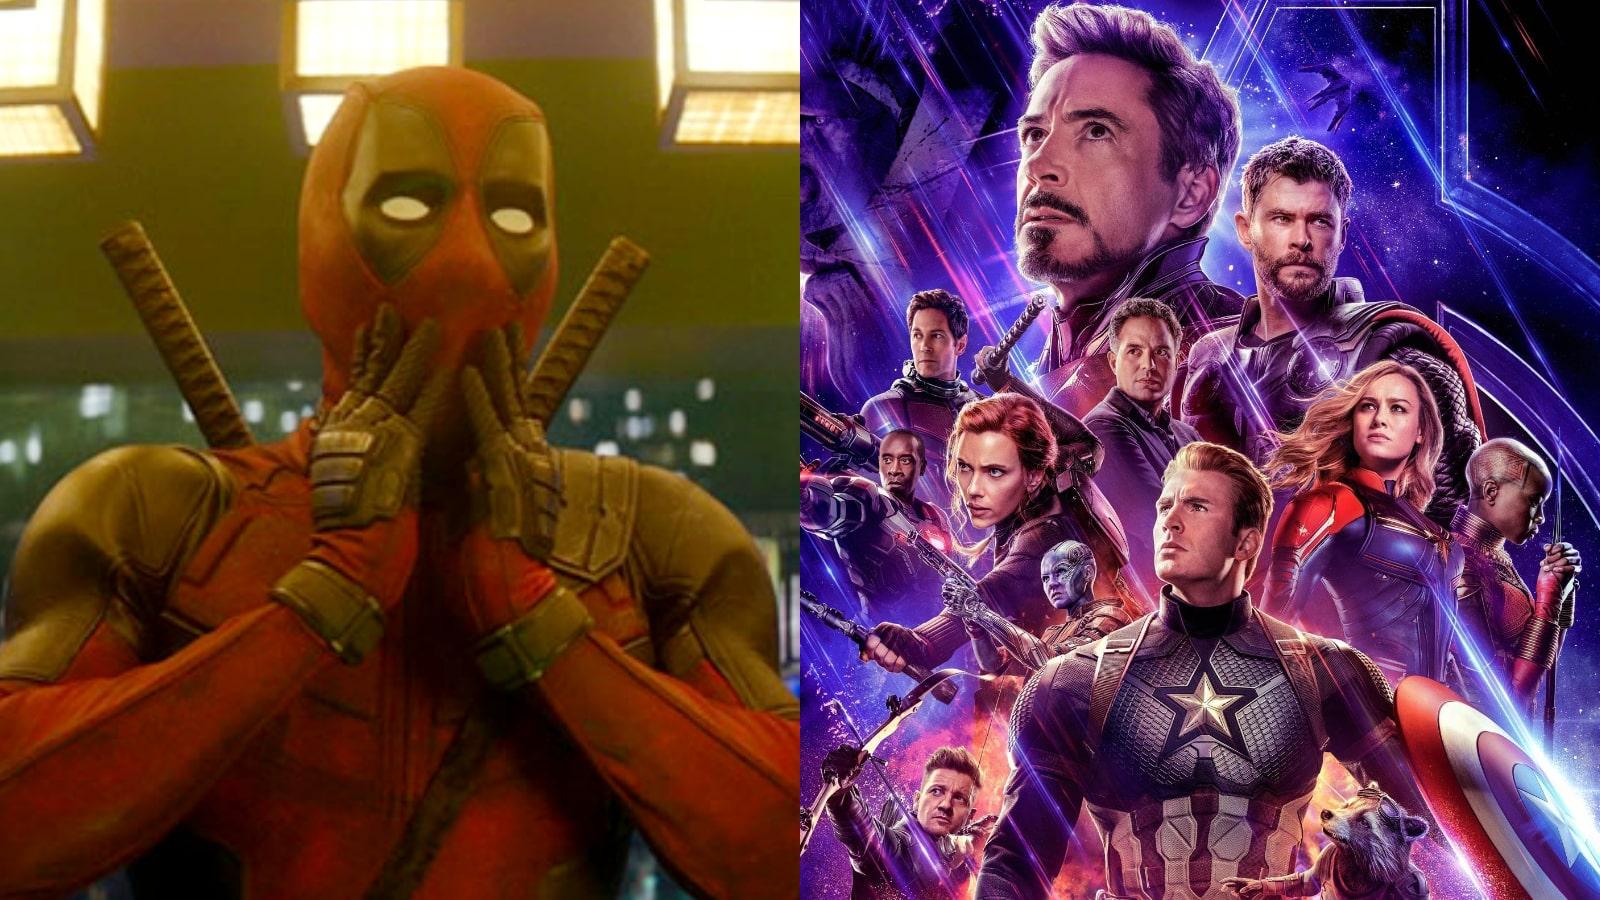 Is Deadpool In The MCU? Answered